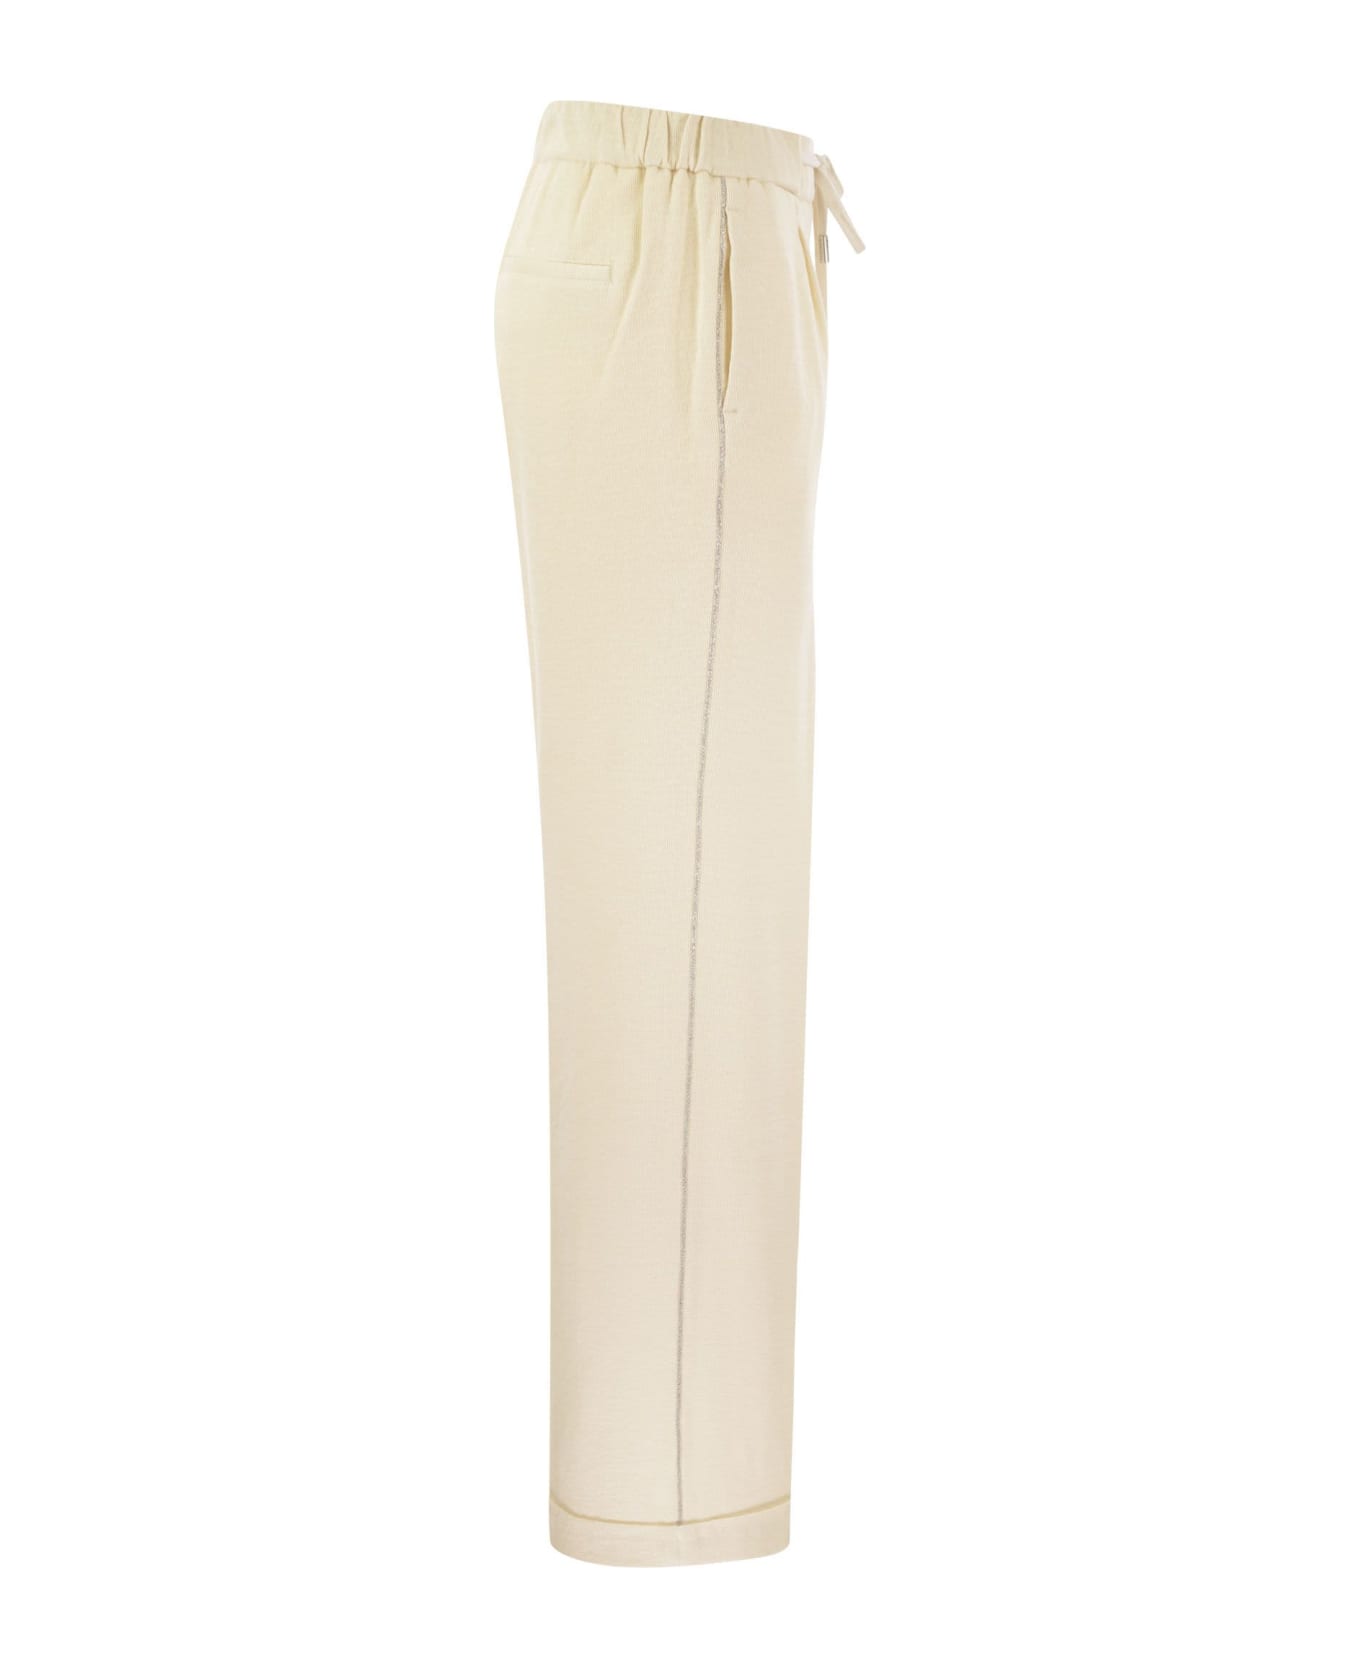 Peserico Cotton And Linen Trousers - Cream